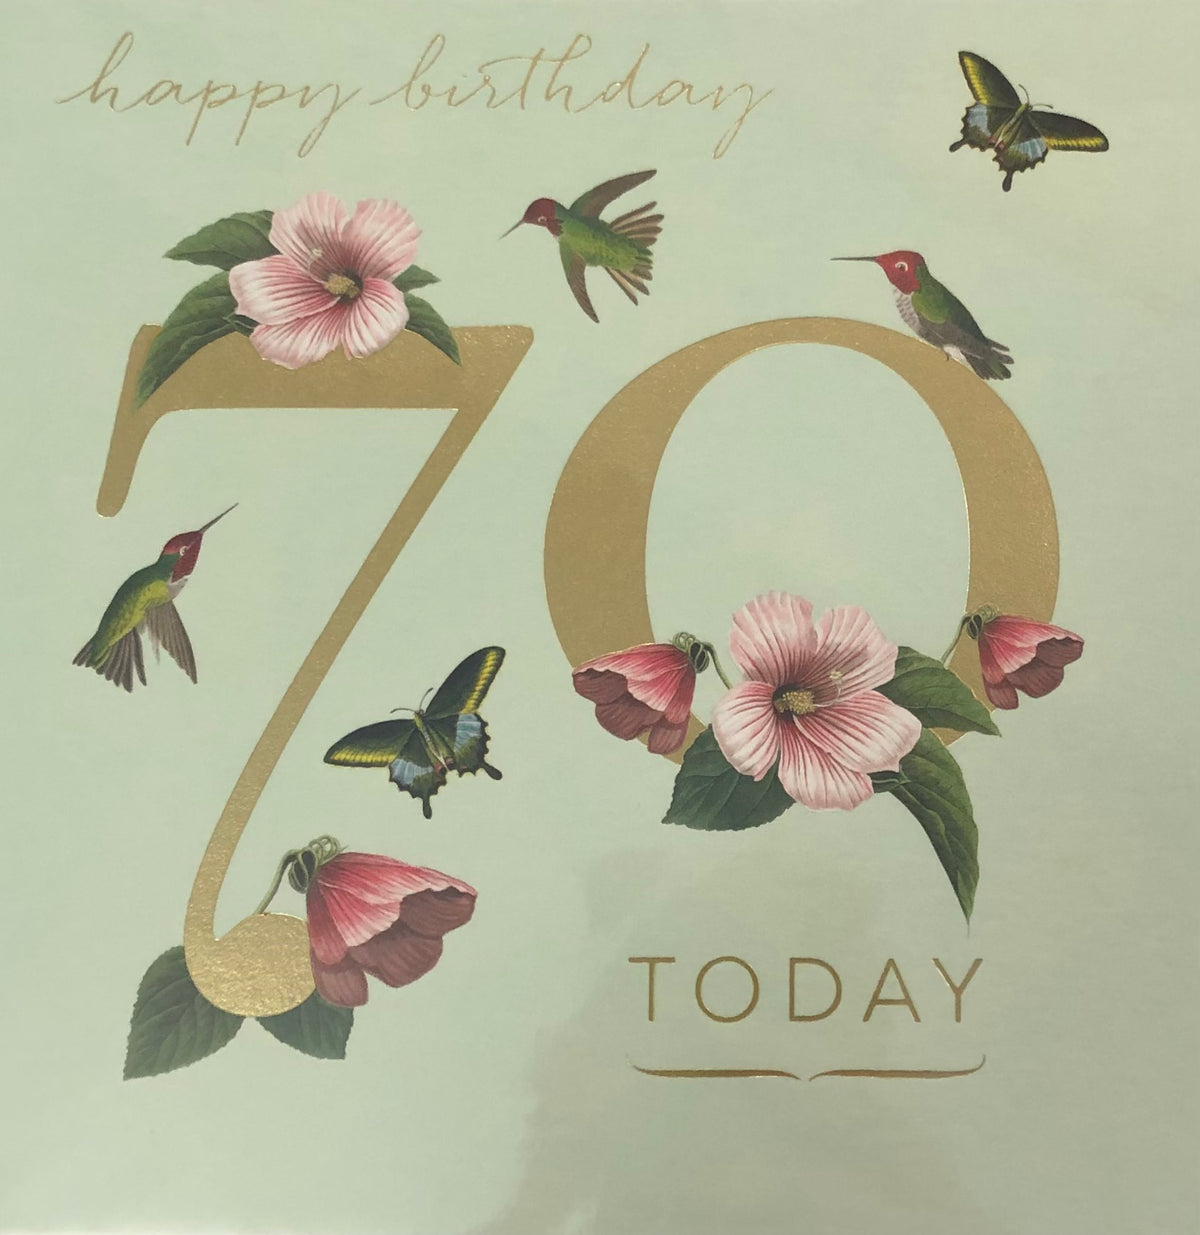 70 Today Card